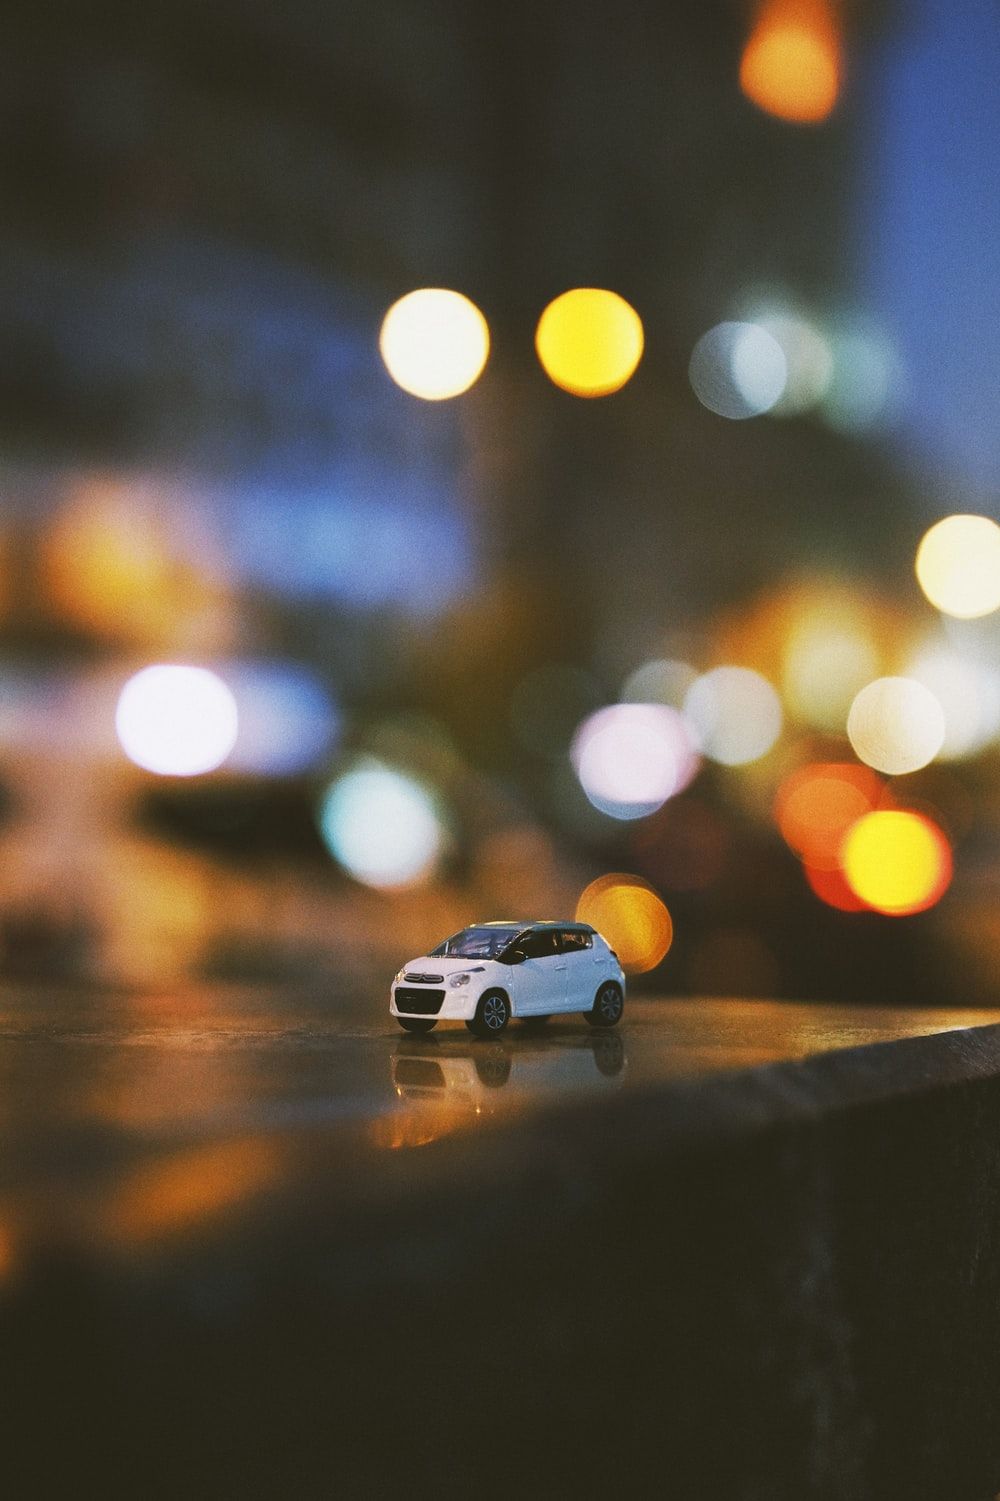 Miniature Car Picture. Download Free Image